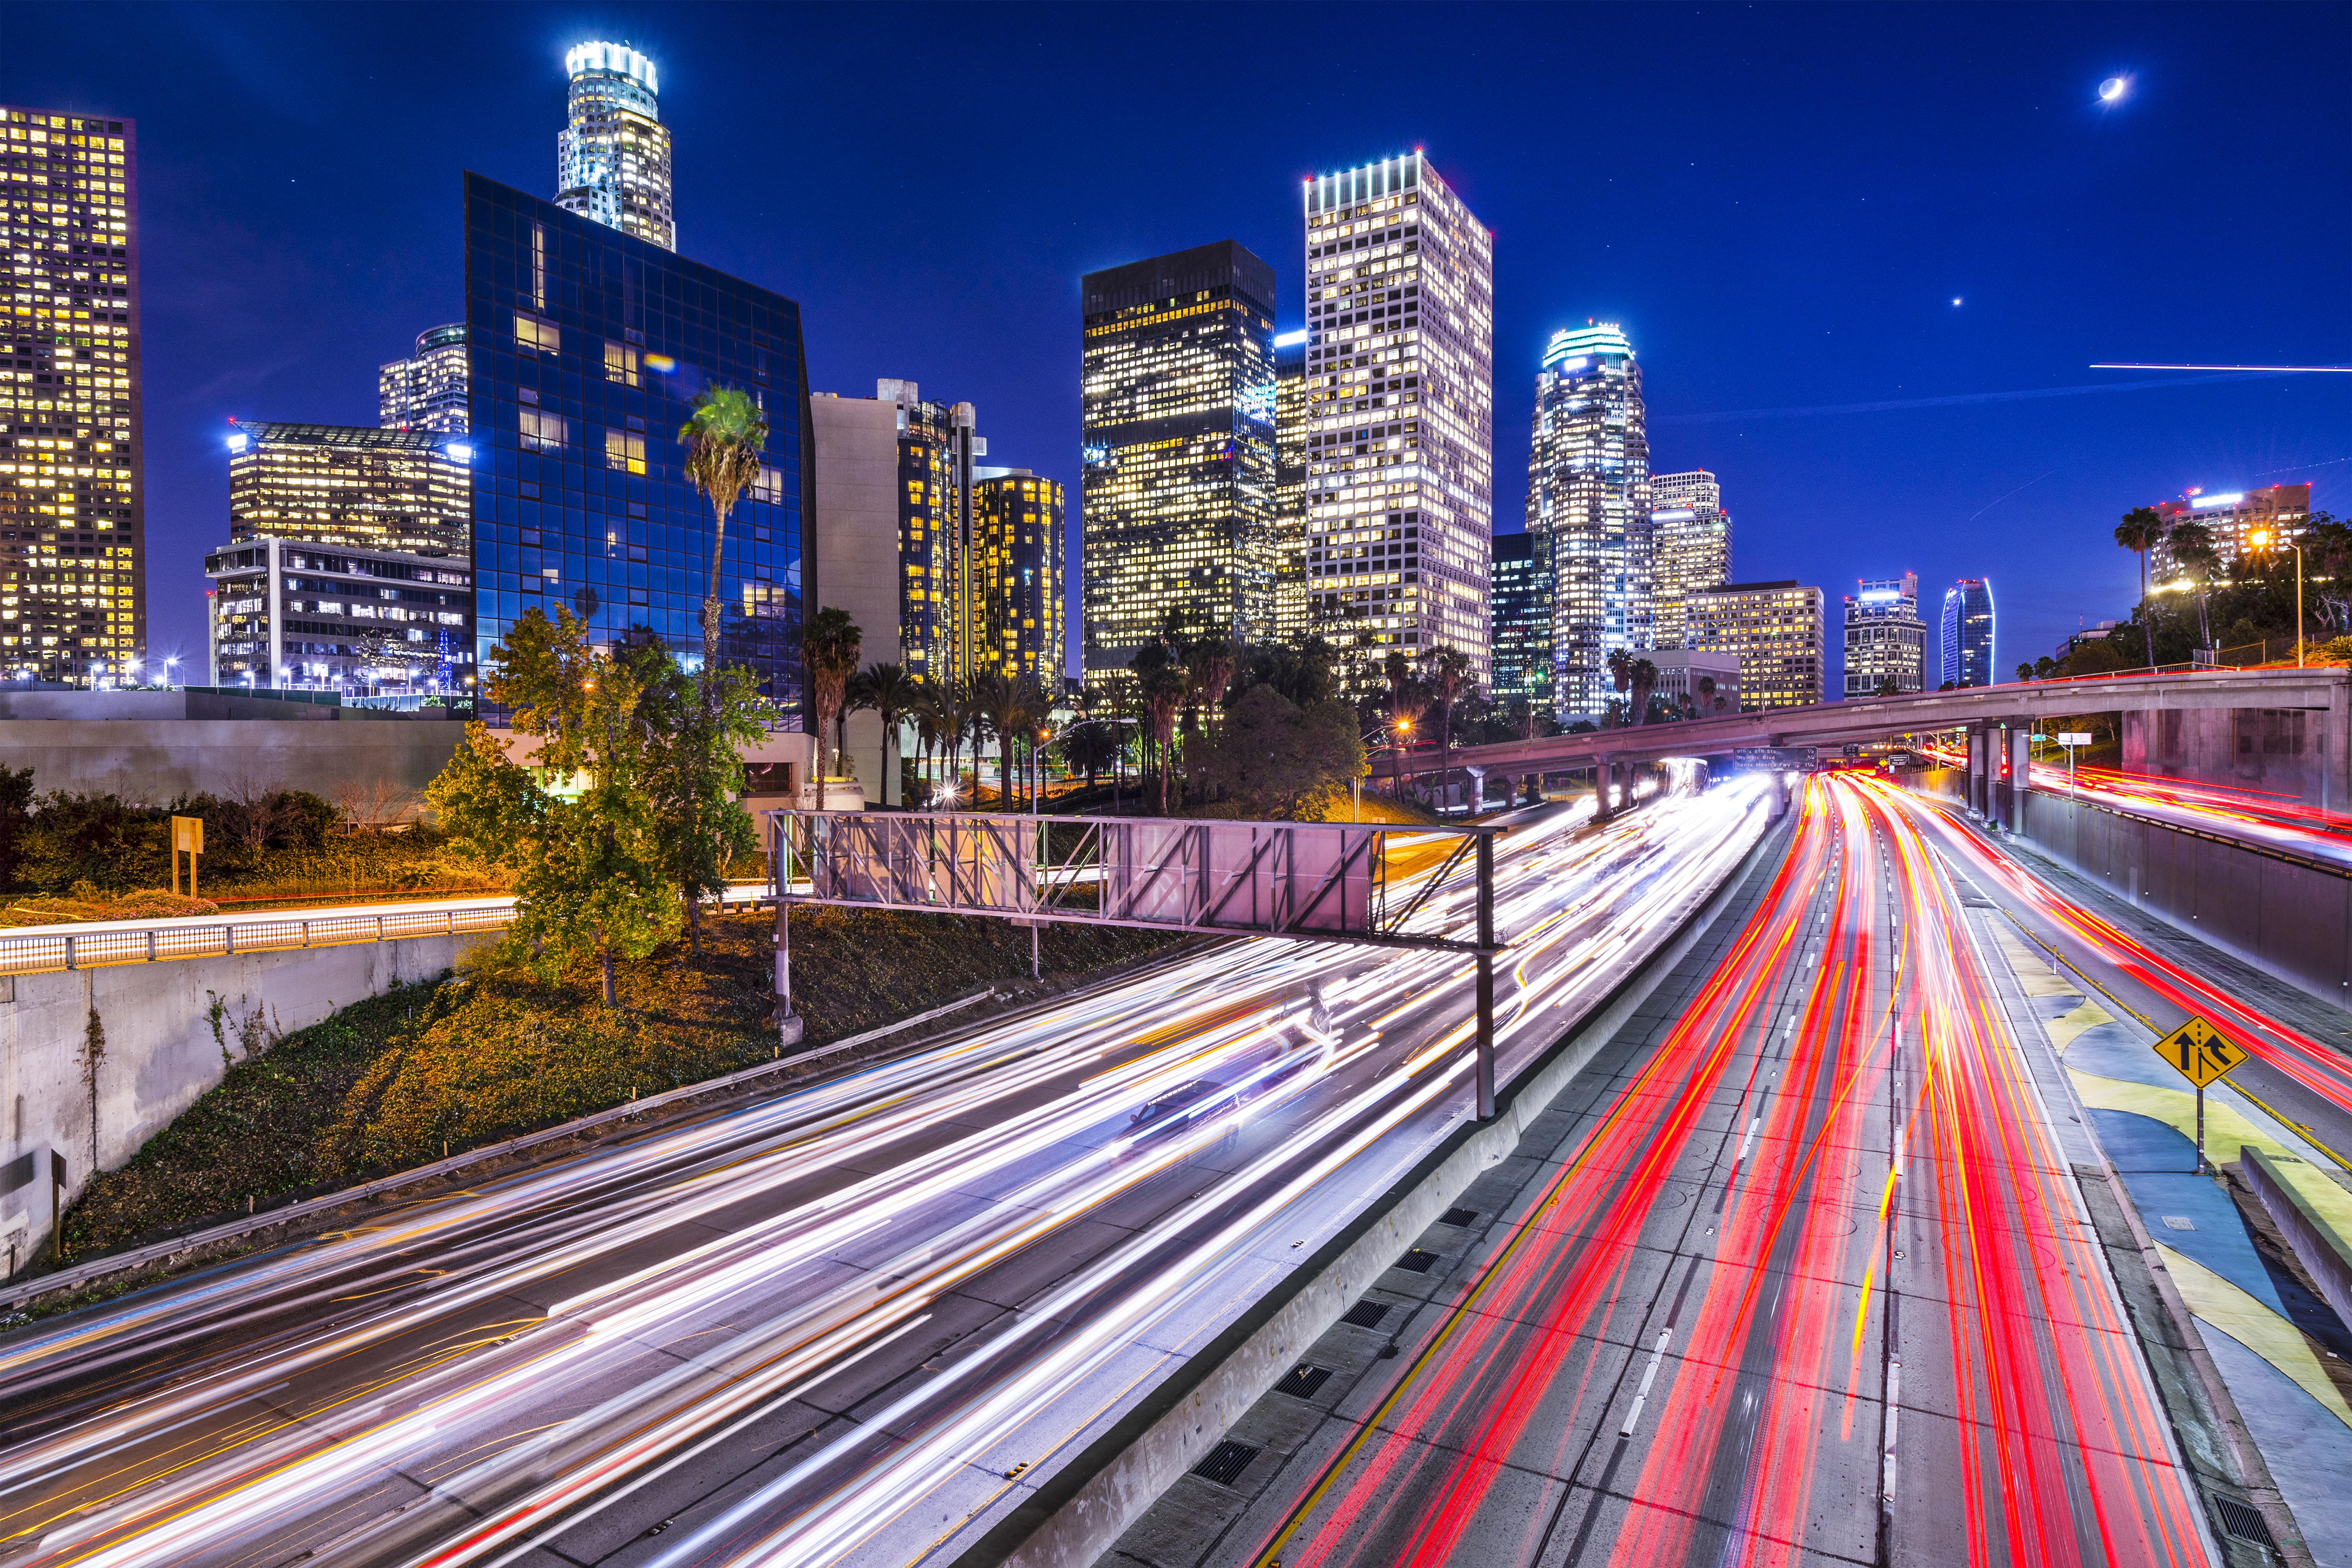 usa, los angeles, man made, building, city, highway, night, time lapse, cities cellphone